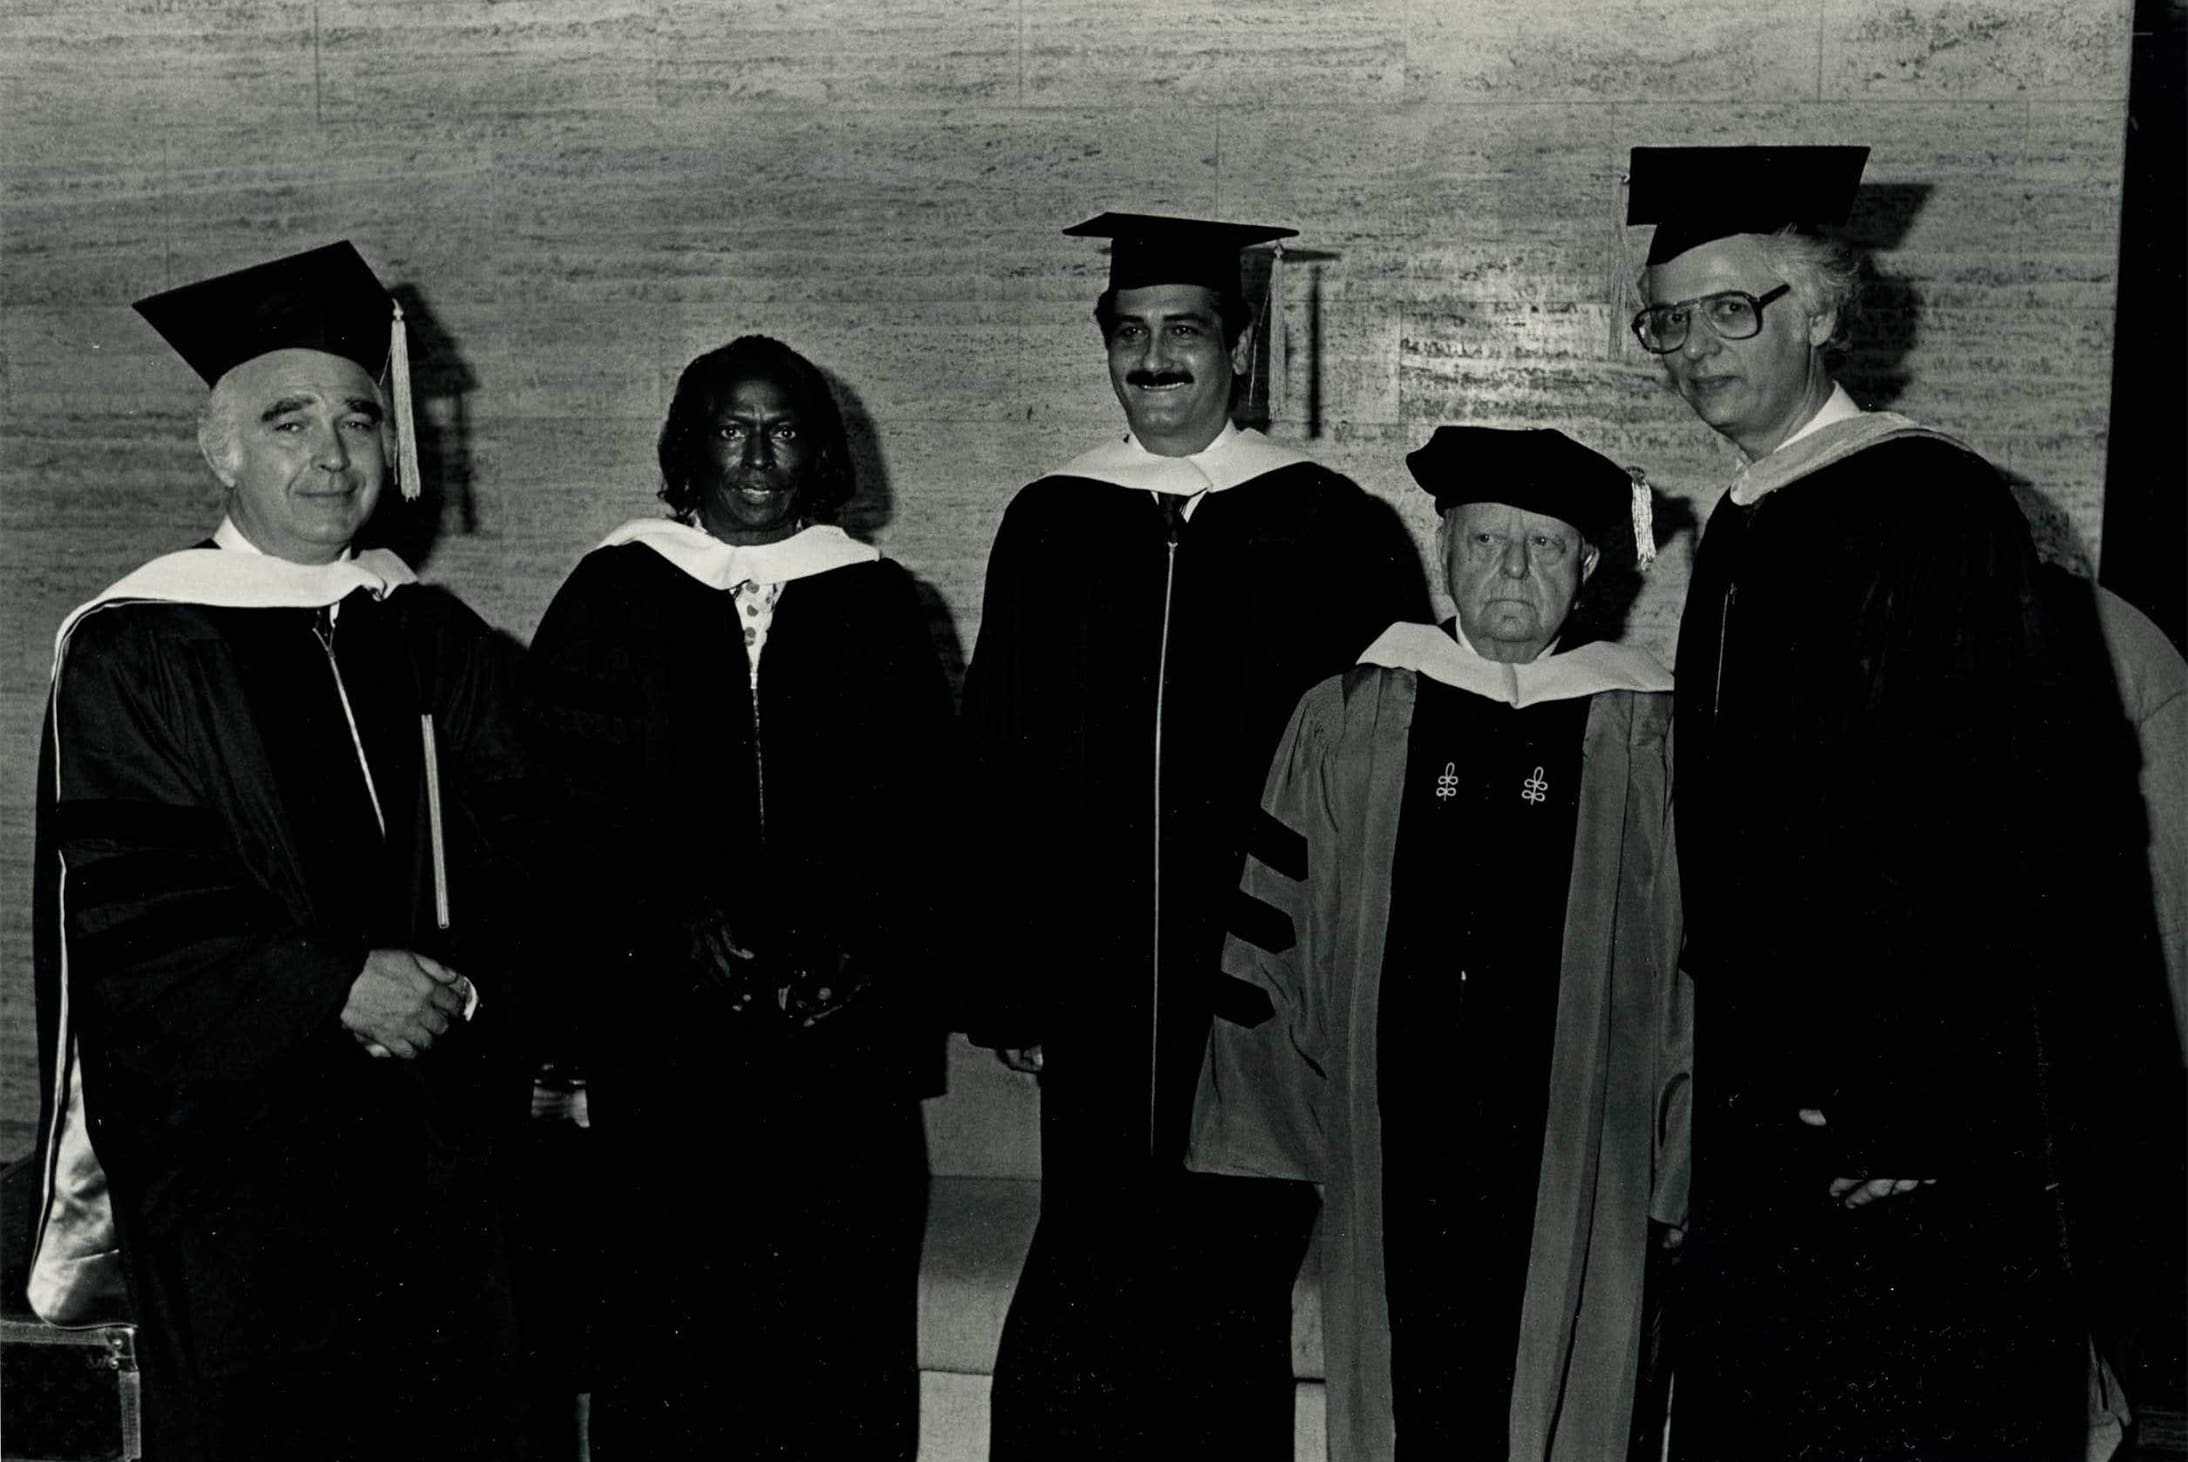 NEC Commencement, 1986: Justino Díaz, center, and fellow honorary degree recipients Joseph Silverstein, Miles Davis, and Virgil Thomson, with NEC president Laurence Lesser. Photo by Paul Foley.